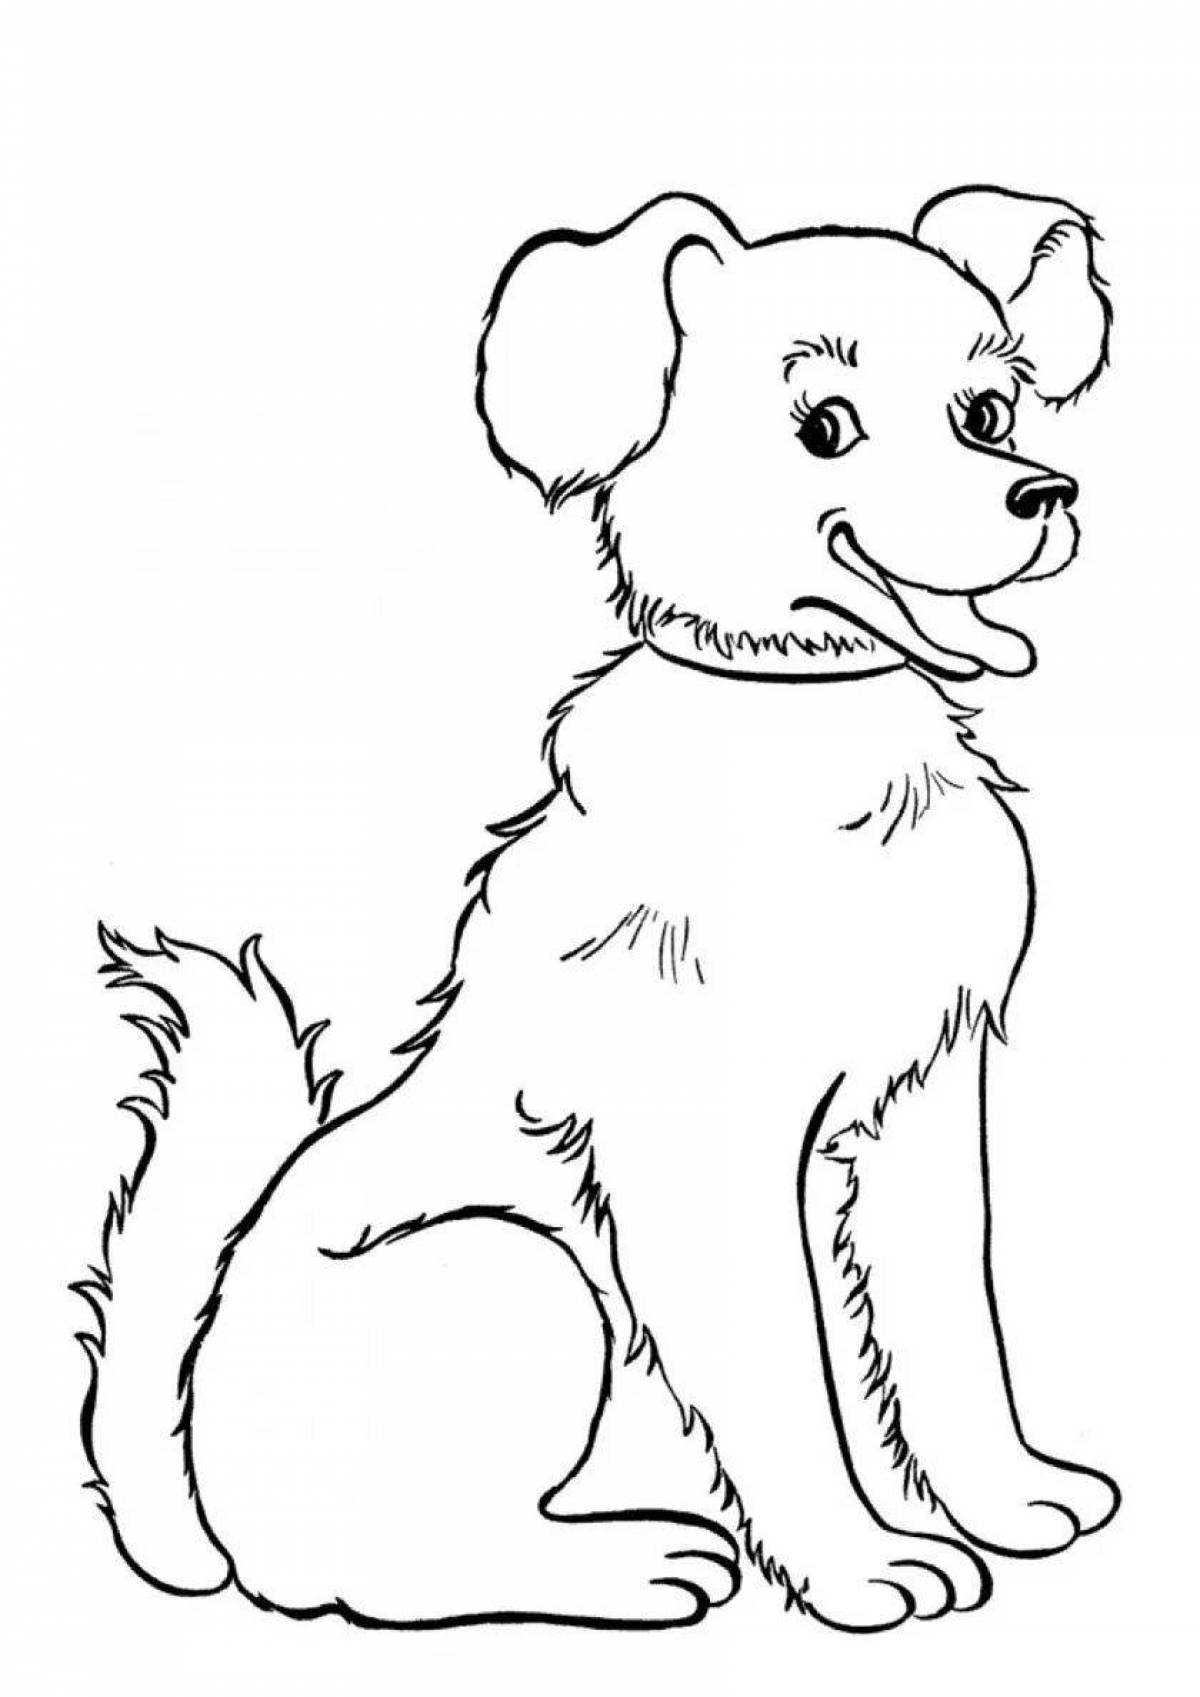 Great dog coloring book for kids 7-8 years old